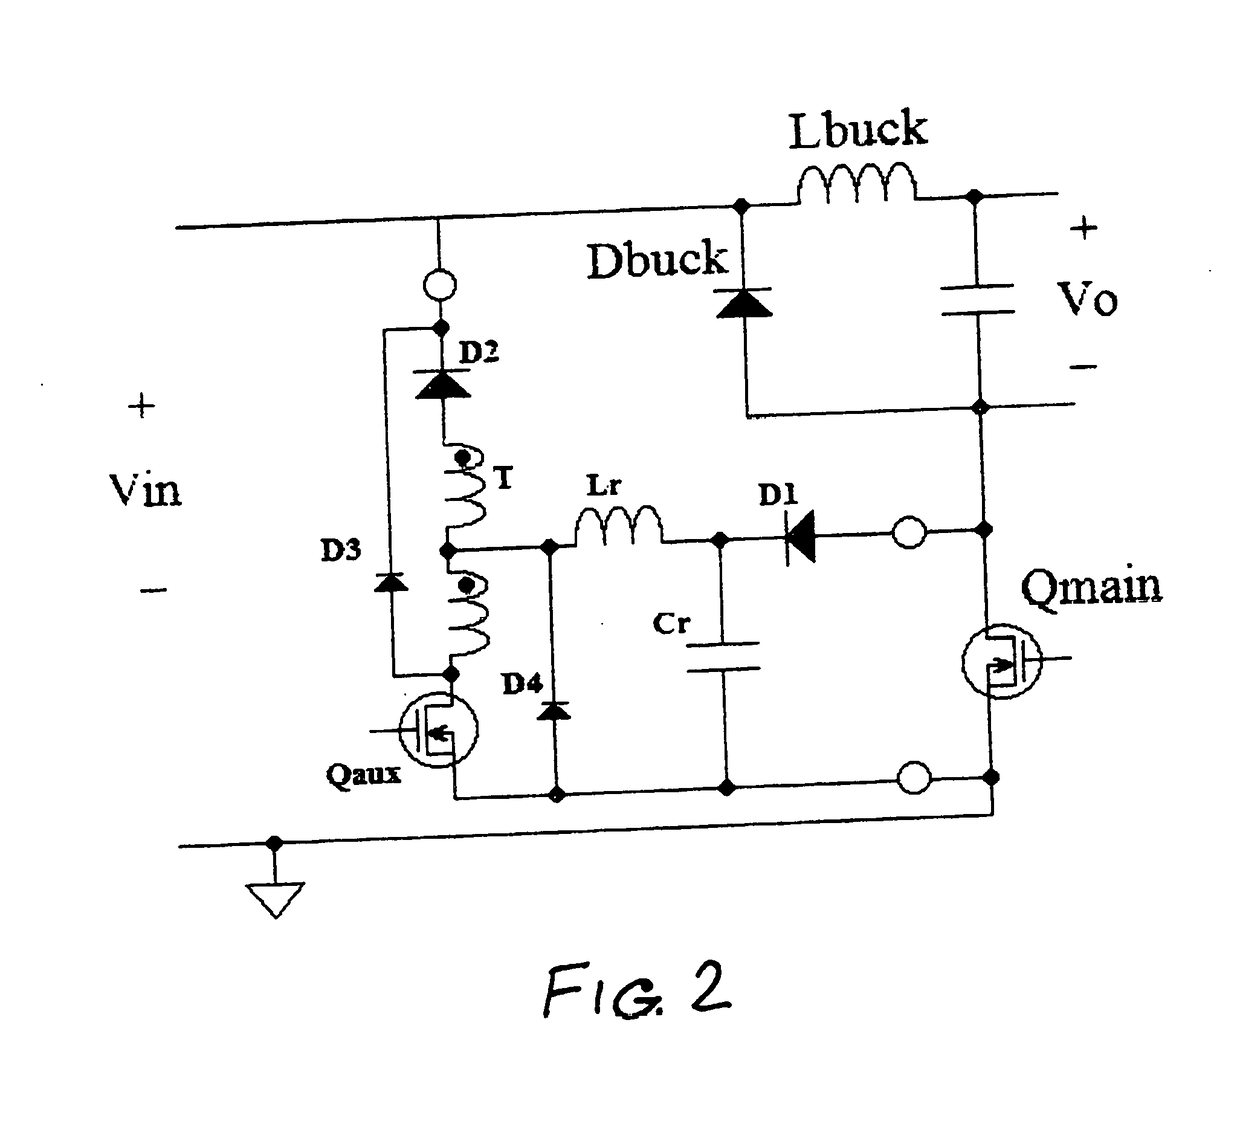 Soft-switching for high-frequency power conversion